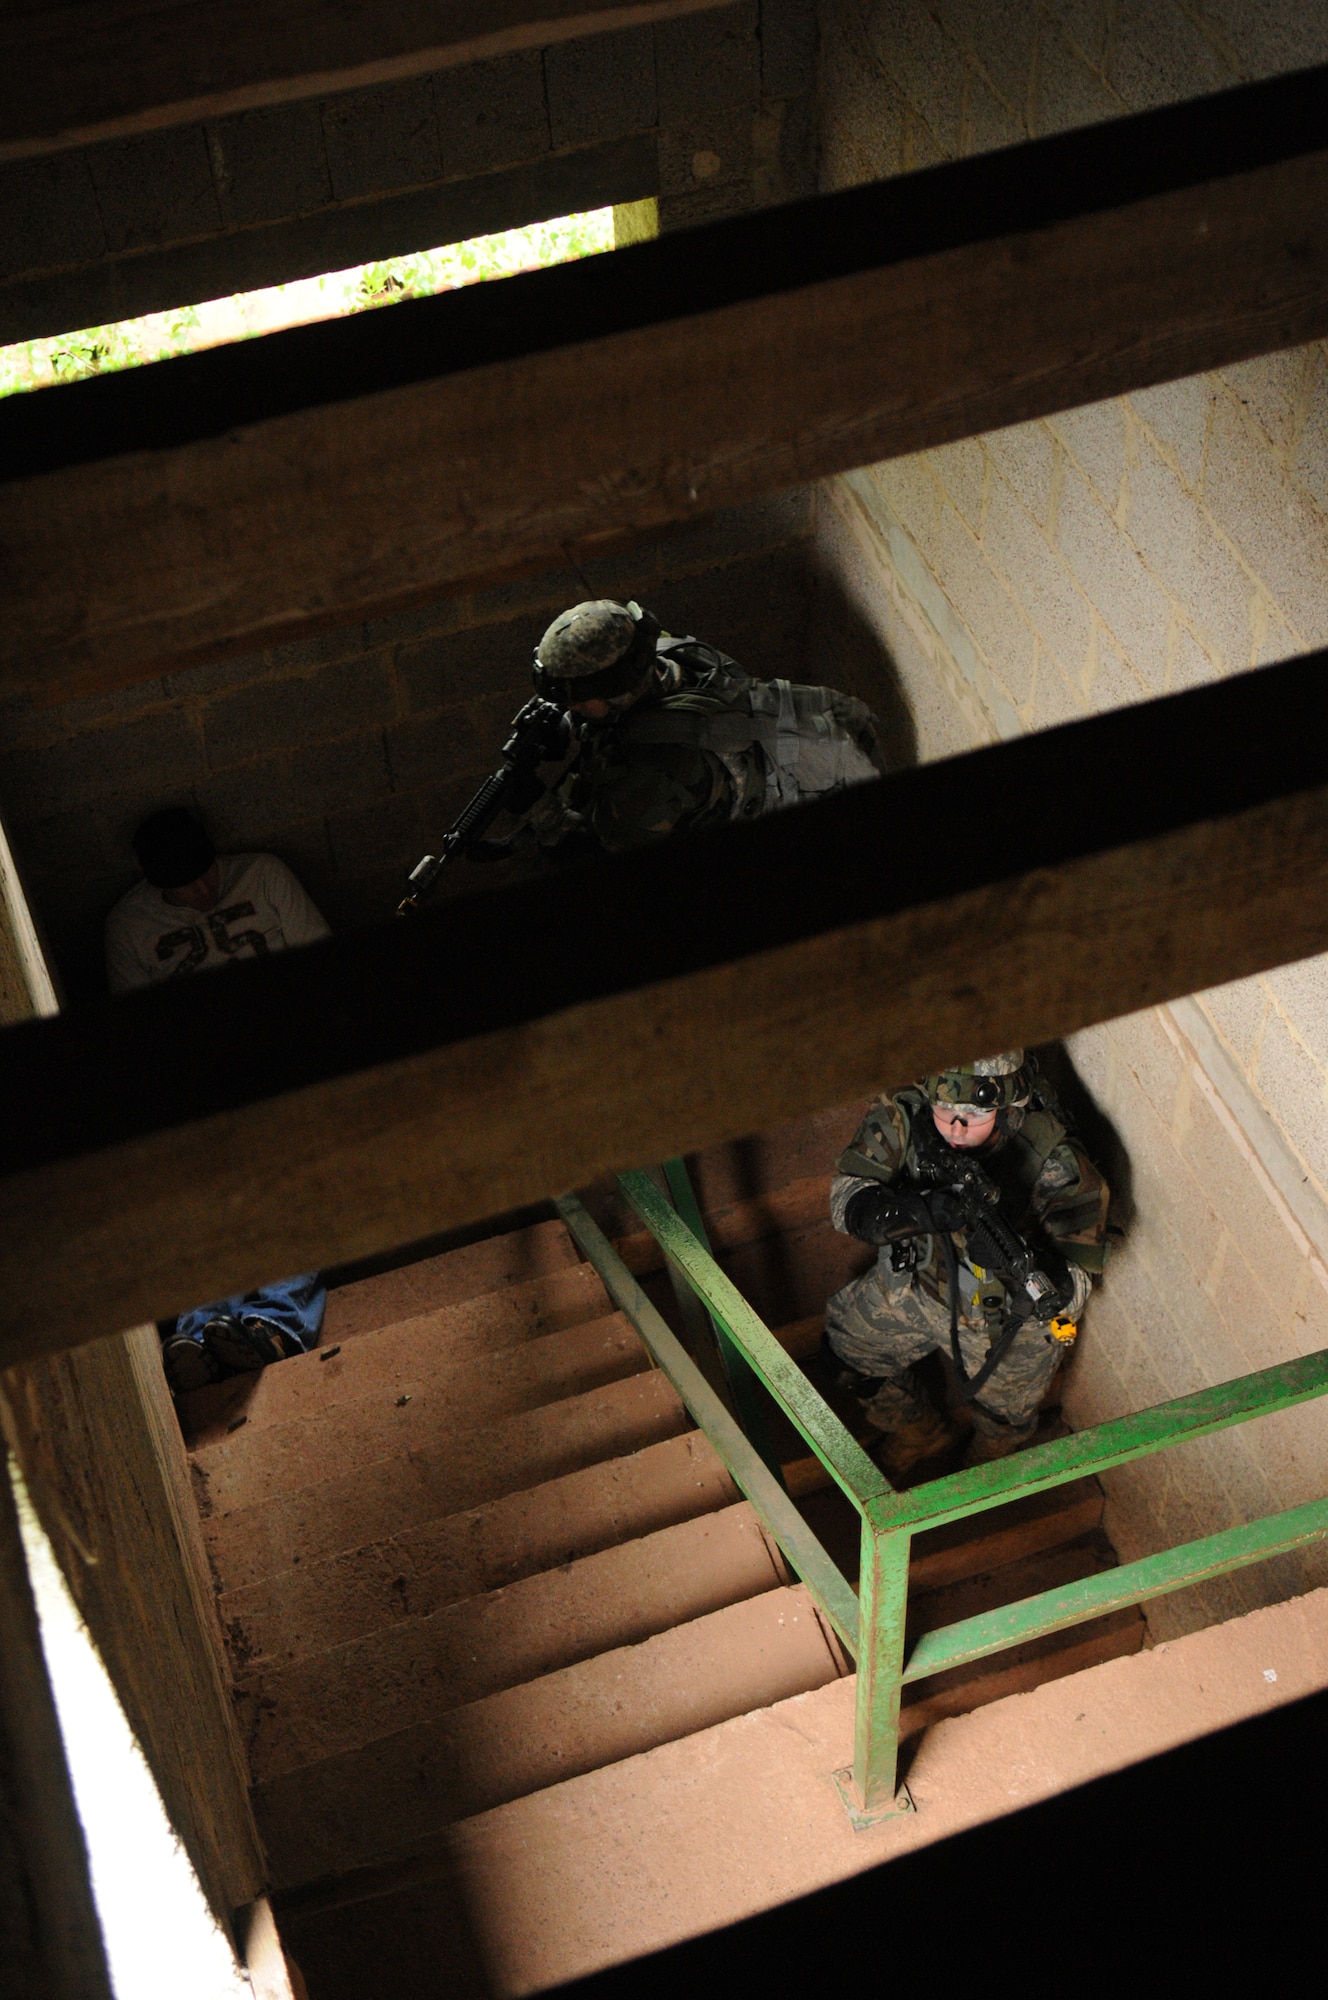 United States Air Force Staff Sgt. Joshua Dickinson, 436th Security Forces Squadron, Dover Air Force Base, Delaware, covers the top of a stair case while a squad member advances, Baumholder Germany, May 15, 2009. Sergeant Dickinson is a student at the Creek Defender Regional Training Center, whose mission is to hone and sharpen skills learned through previous training to prepare students for upcoming deployments. (U.S. Air Force photo by Senior Airman Levi Riendeau)